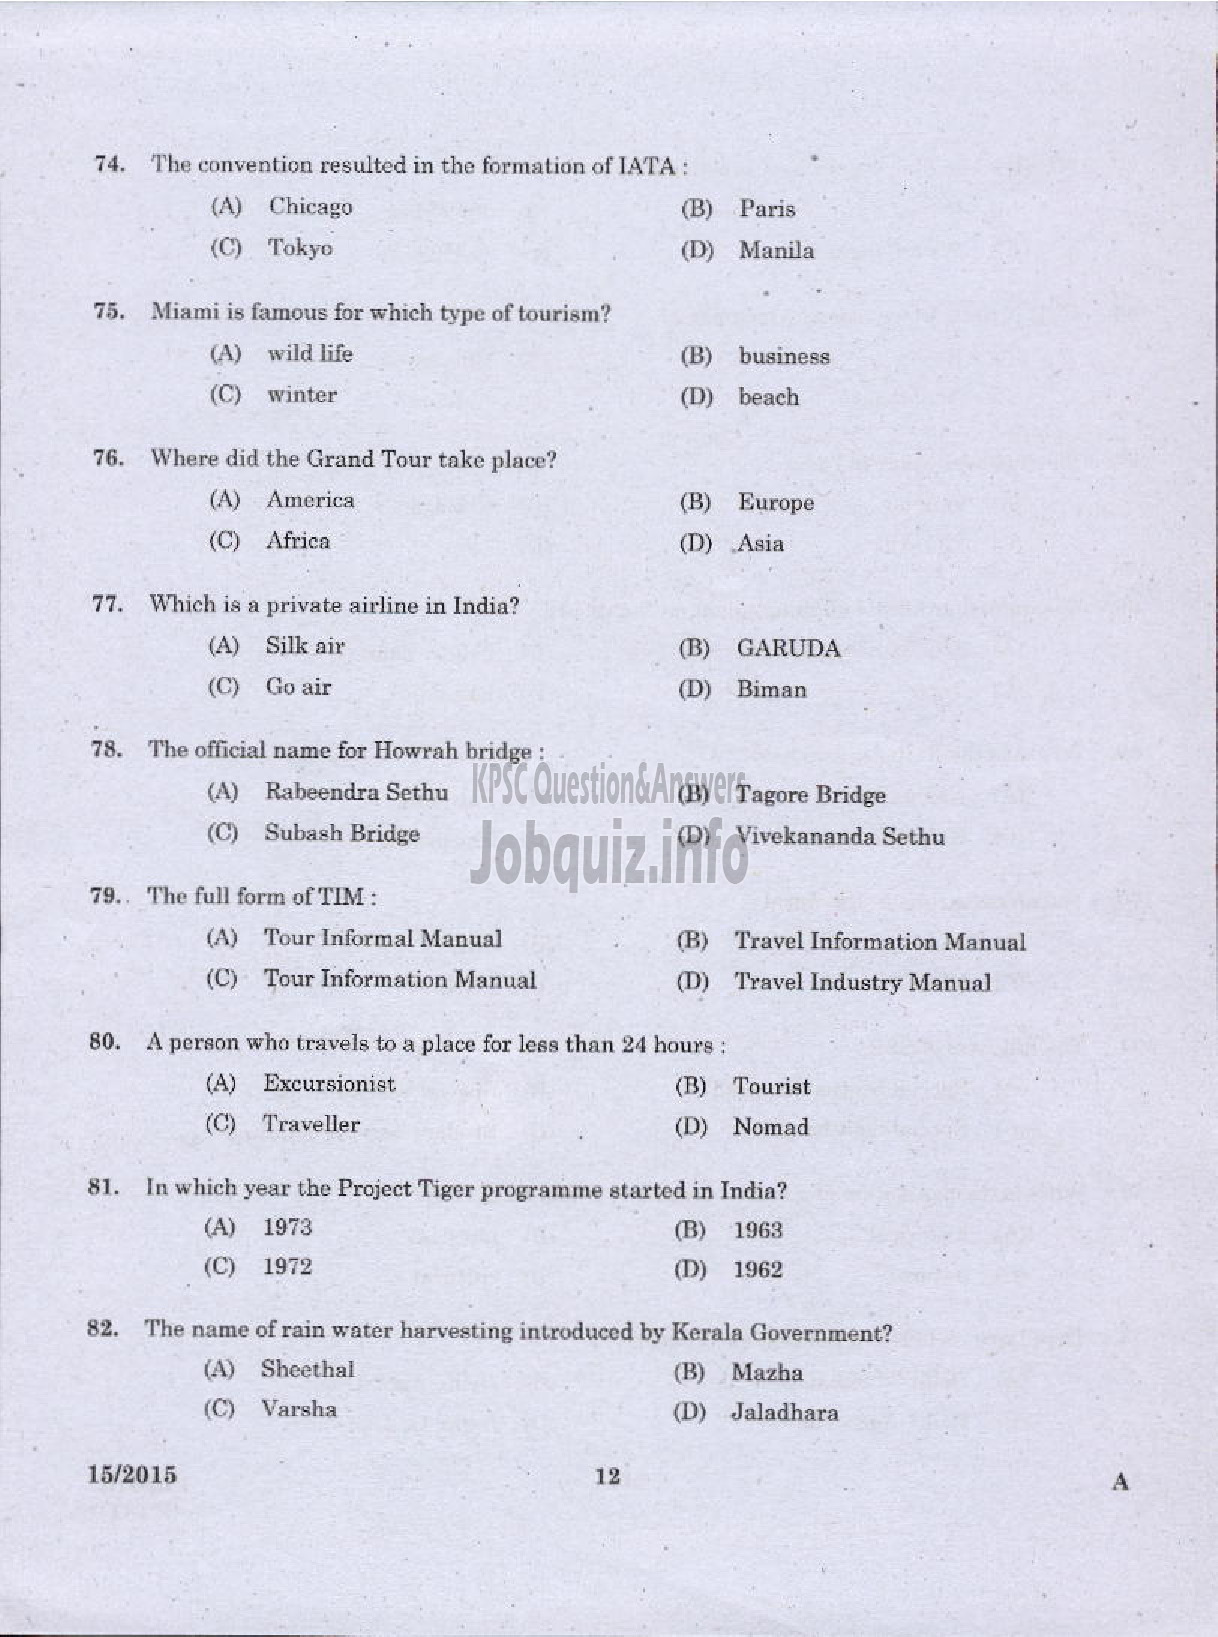 Kerala PSC Question Paper - LABORATORY TECHNICAL ASSISTANT TRAVEL AND TOURISM VHSE-10